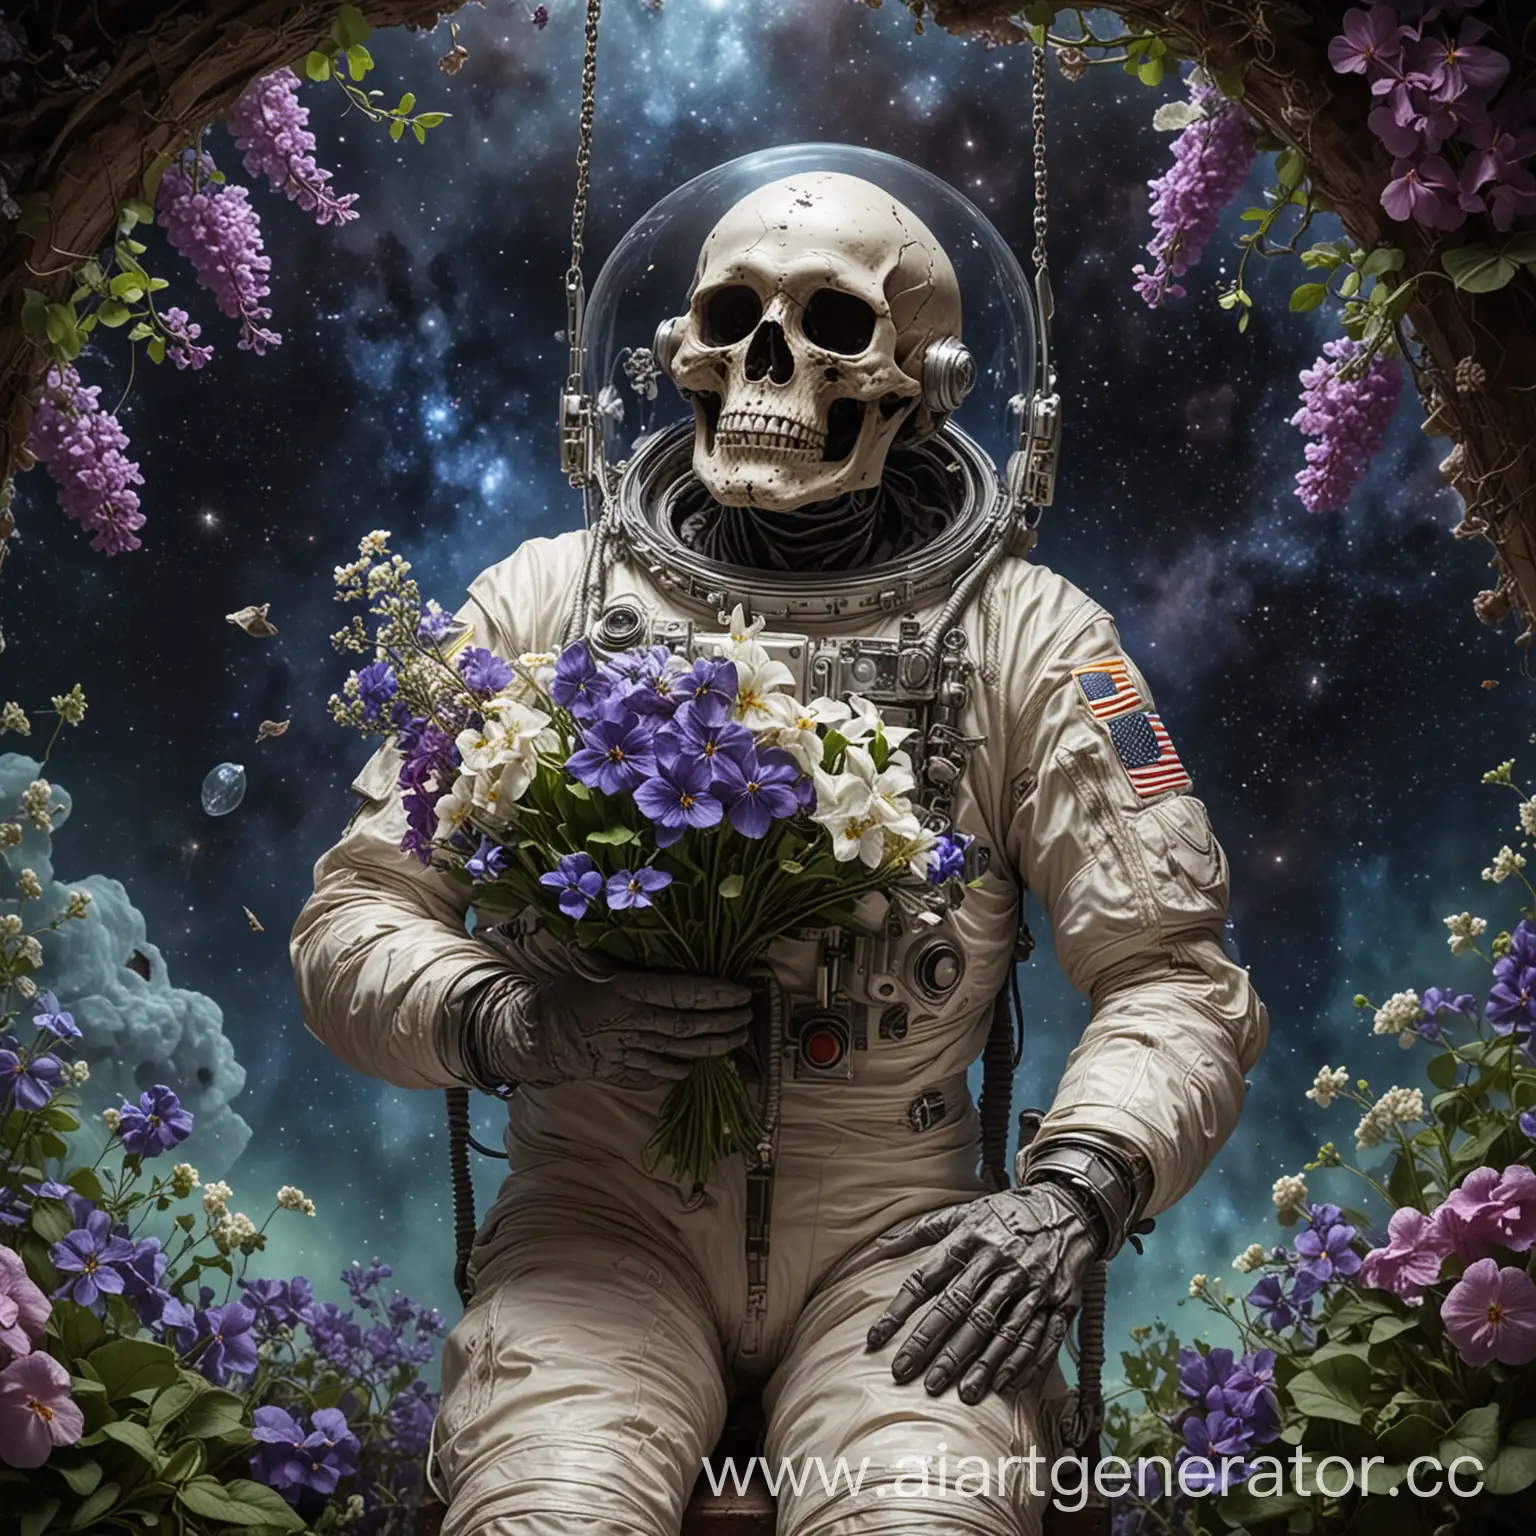 Astronaut-with-FlowerCovered-Suit-Swings-in-Space-Holding-Bouquet